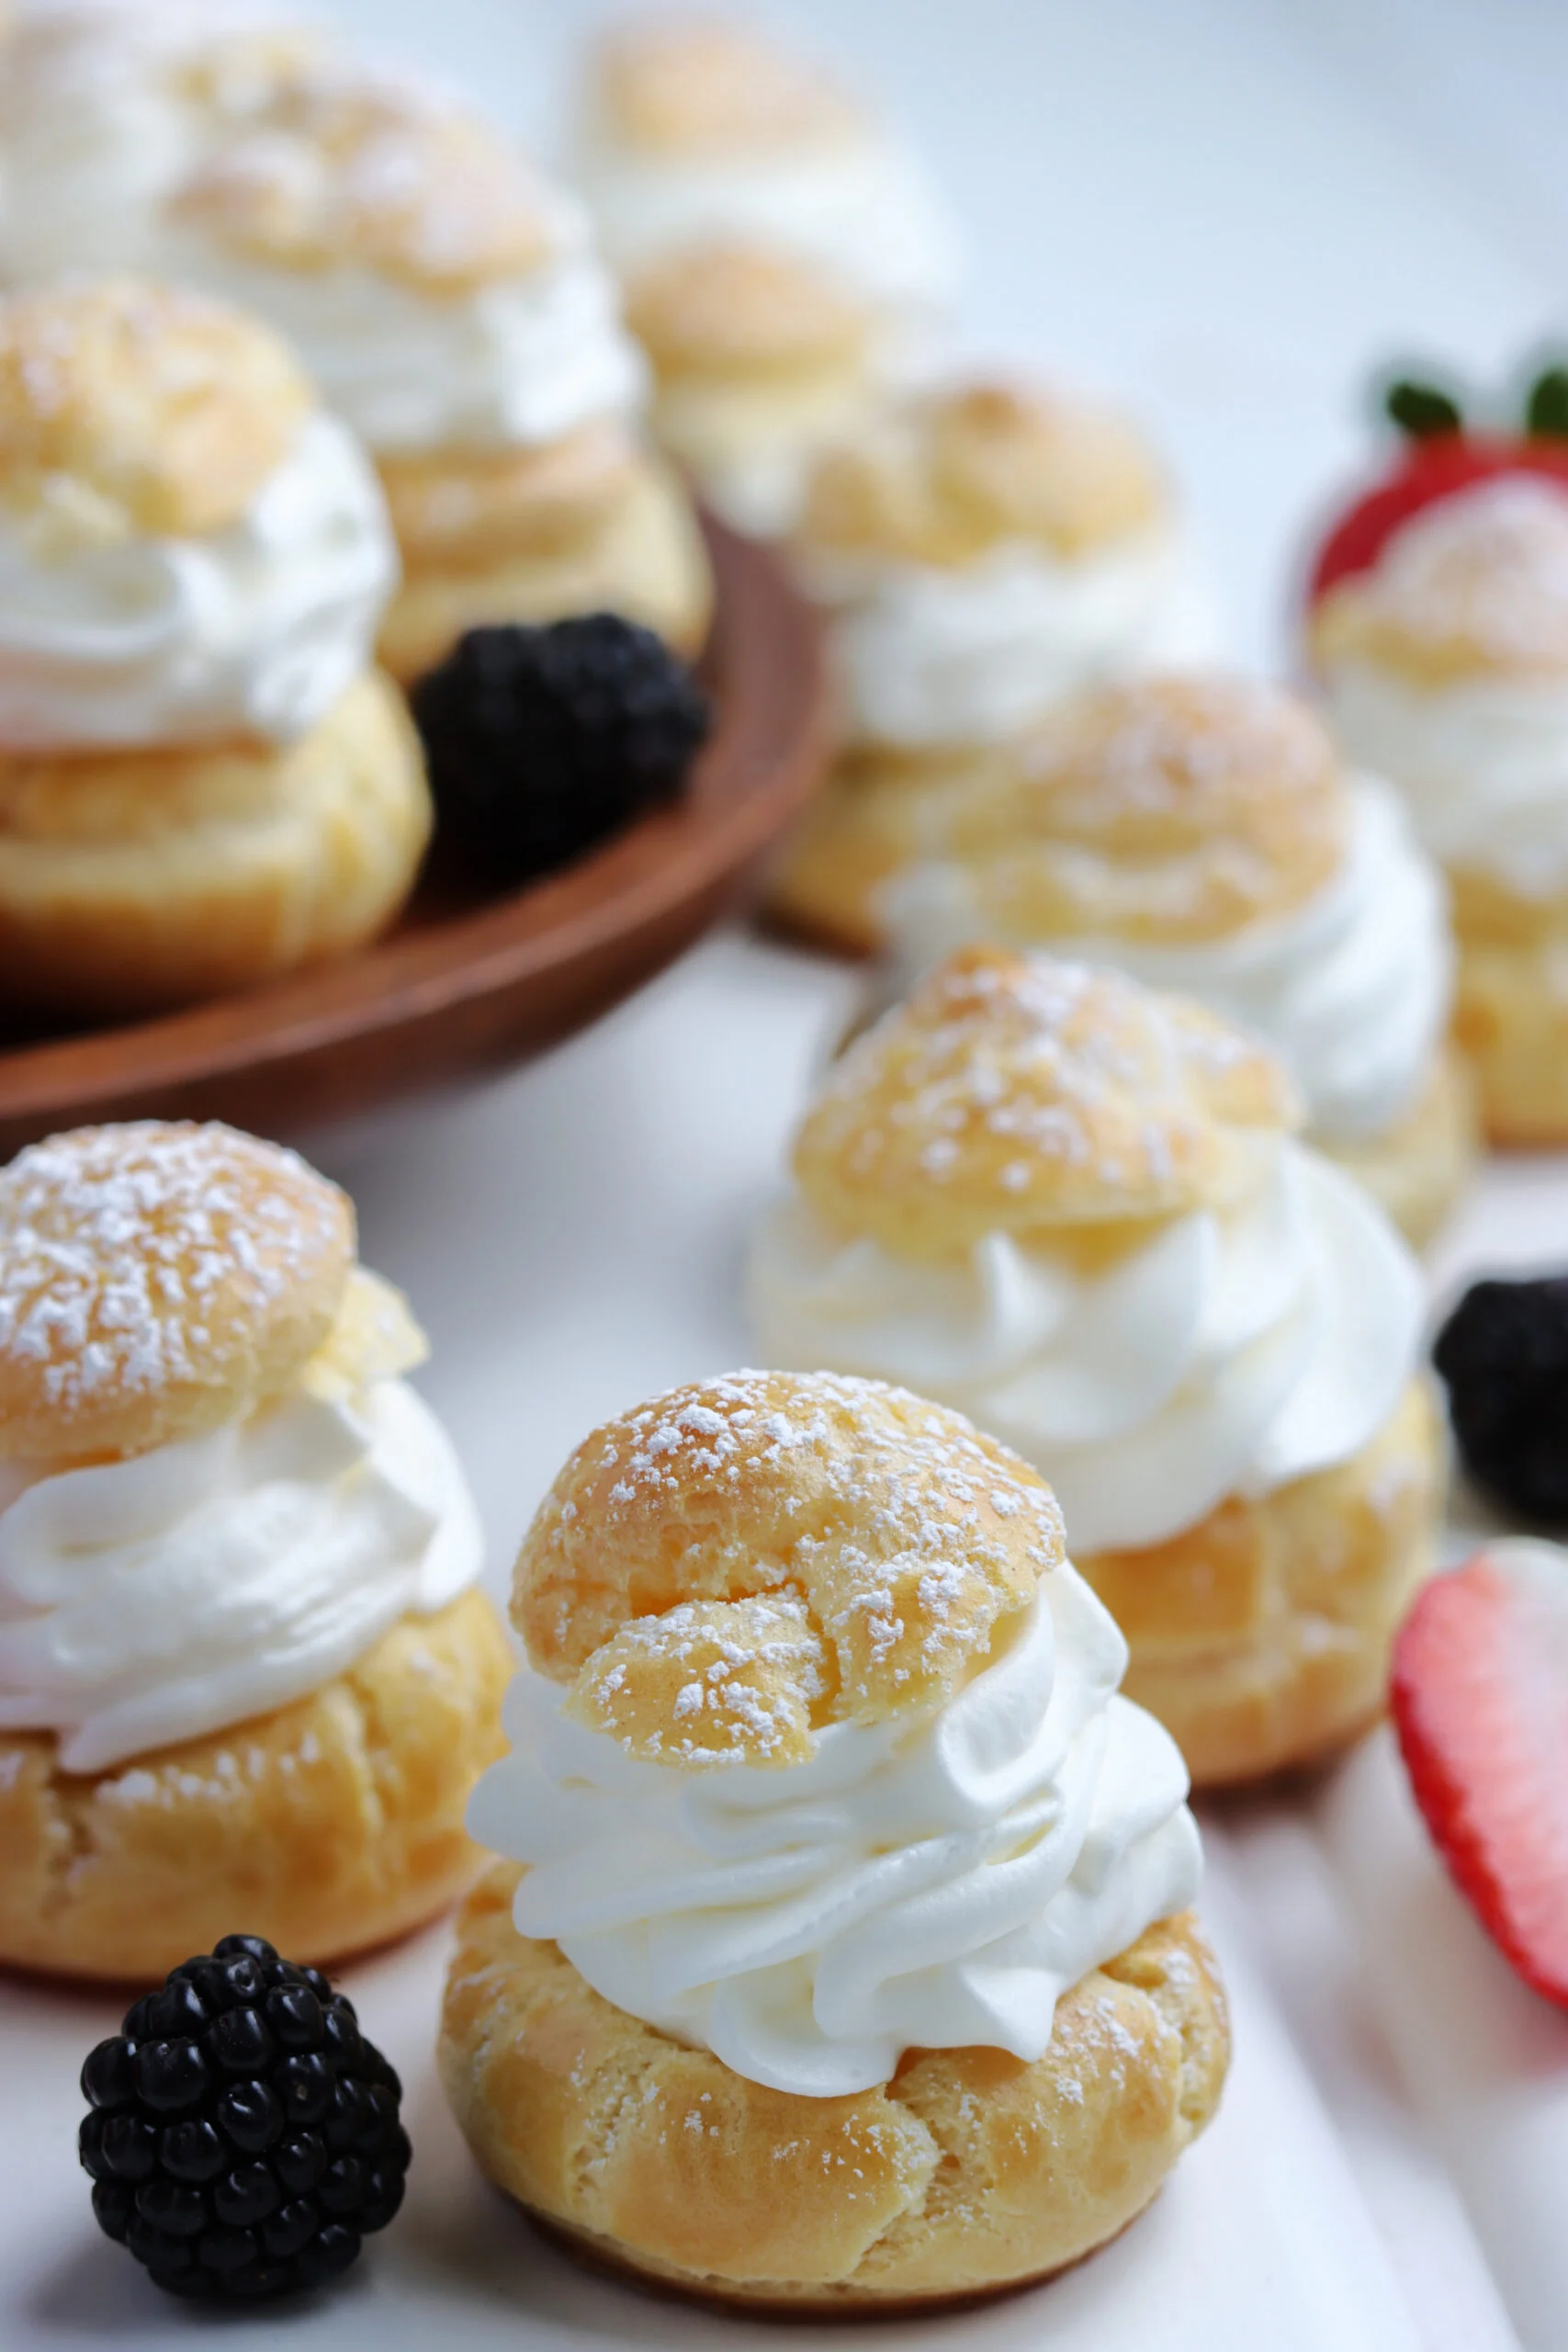 Tea Party Sweets - Cream Puffs